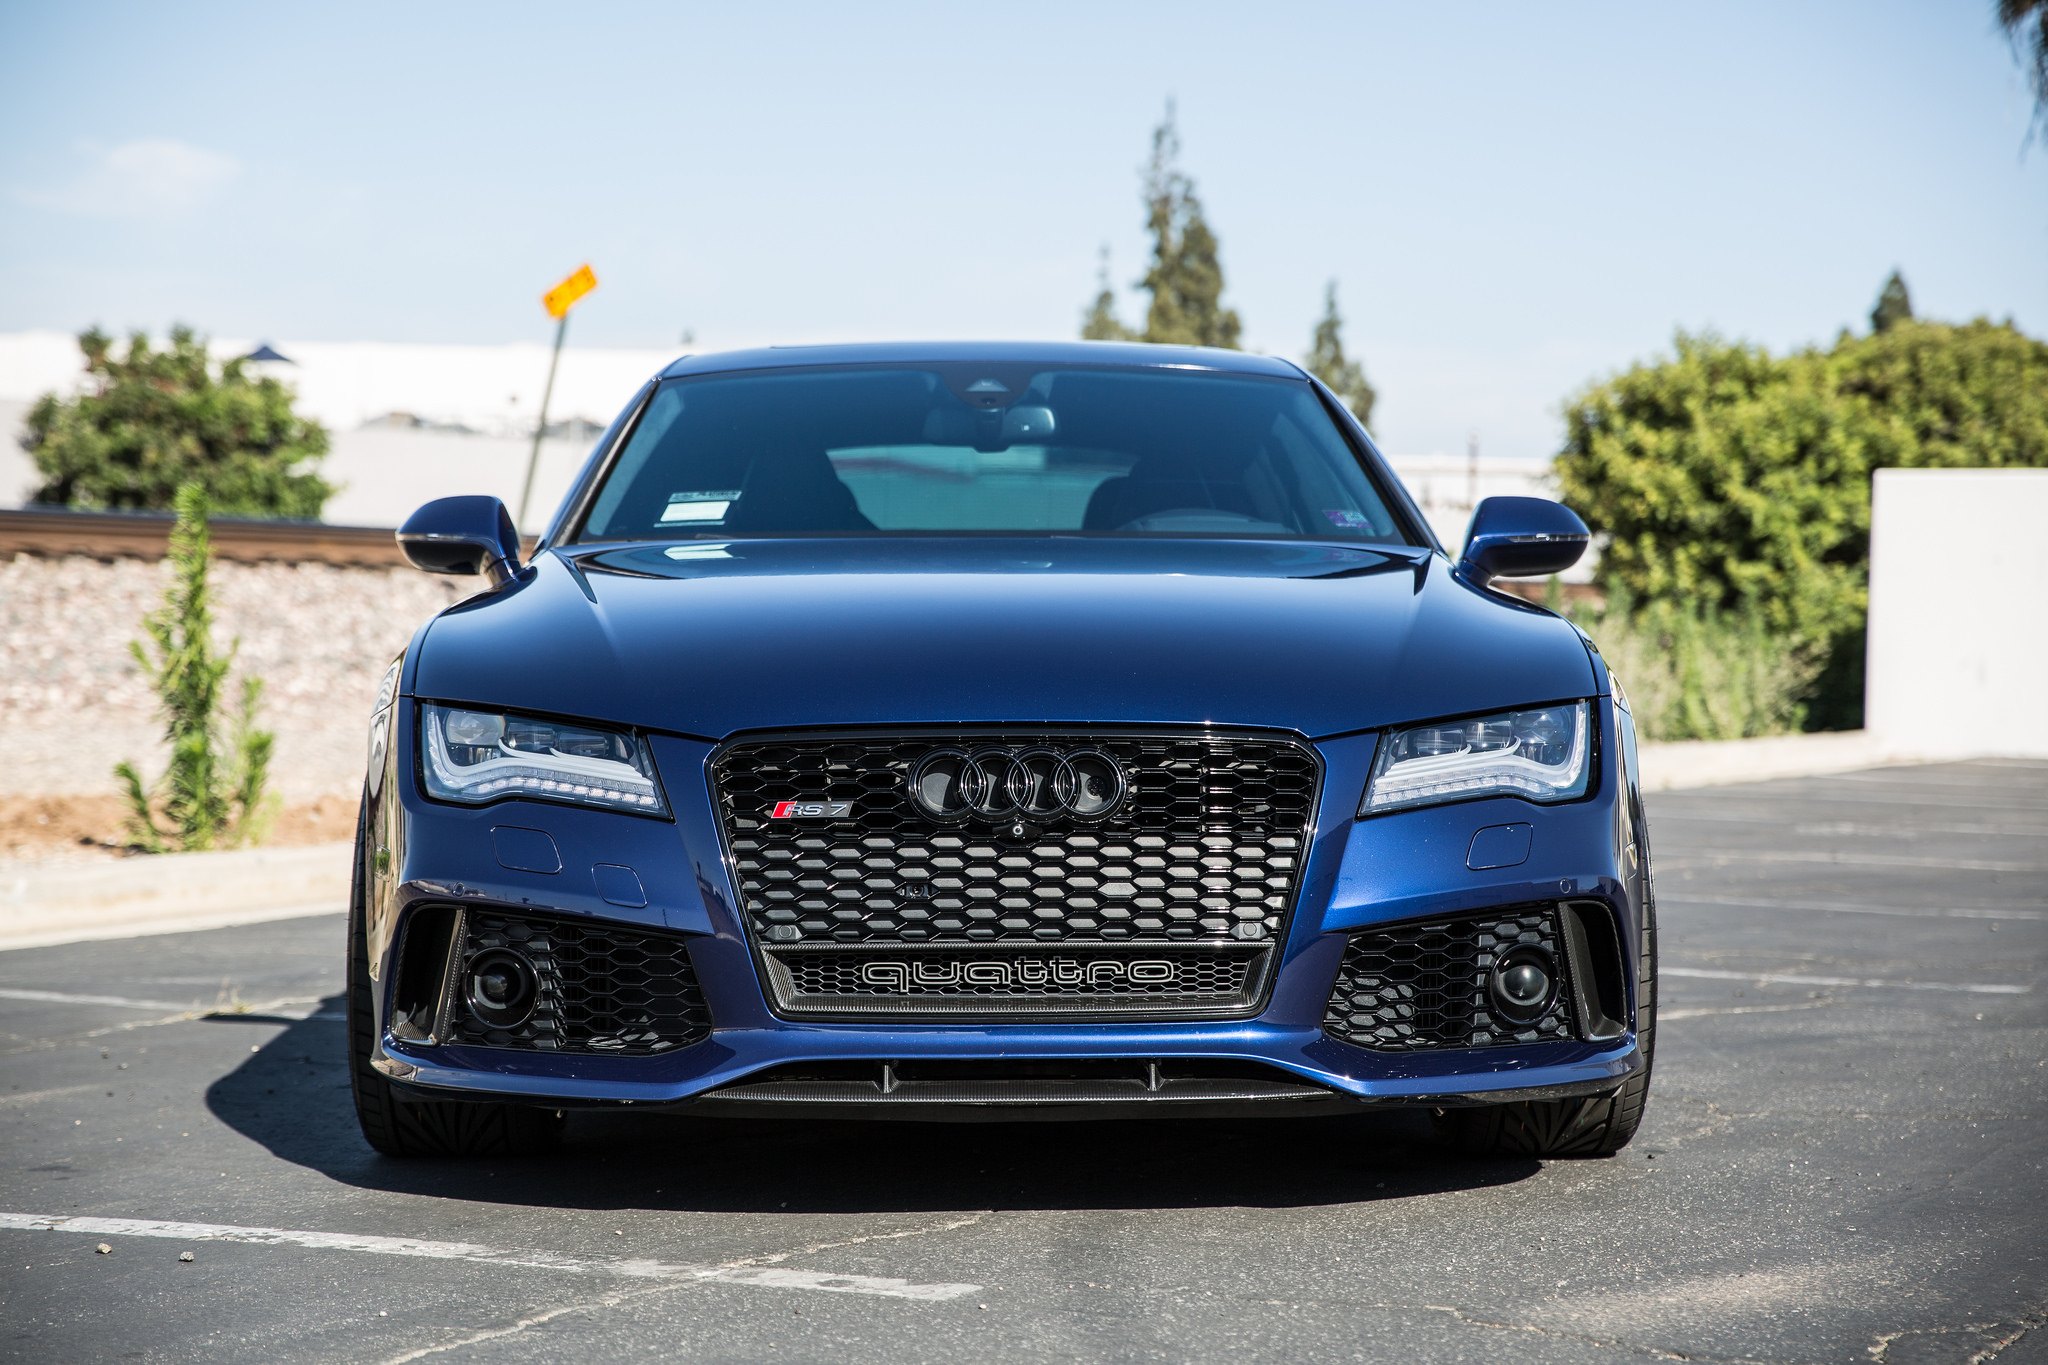 Blacked Out Mesh Grille on Custom Blue Audi S7 - Photo by Vertini Wheels